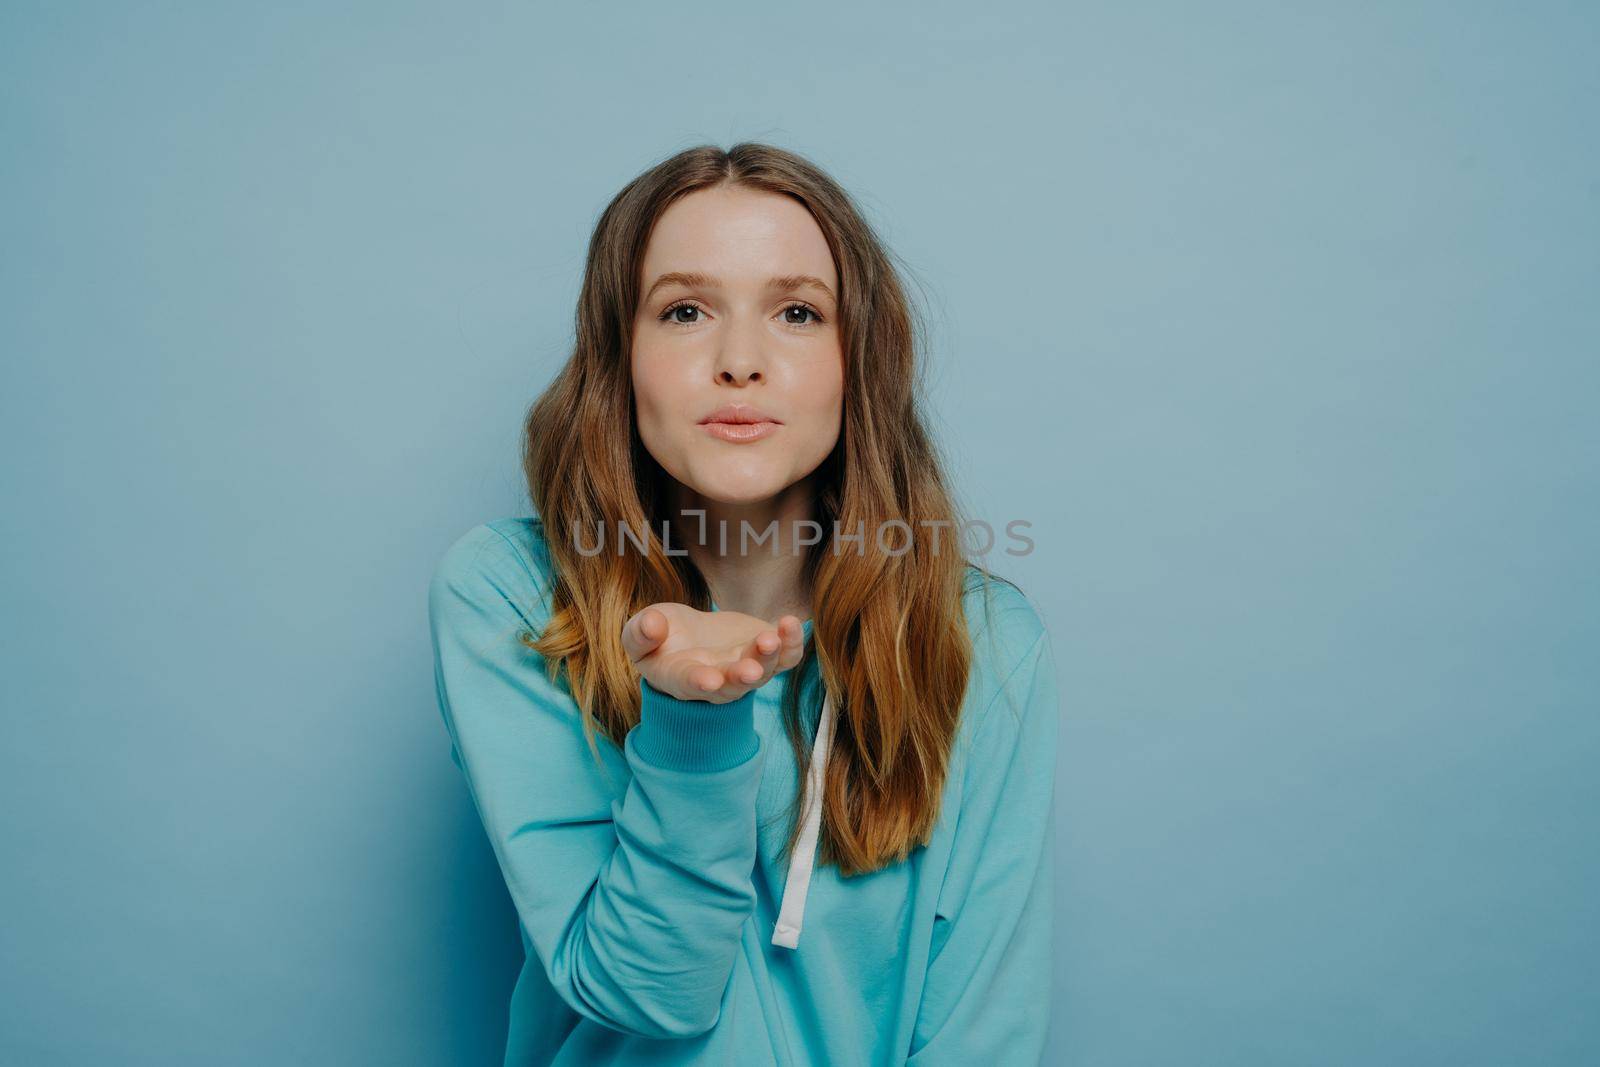 Pretty young girl sending air kiss posing over blue background by vkstock